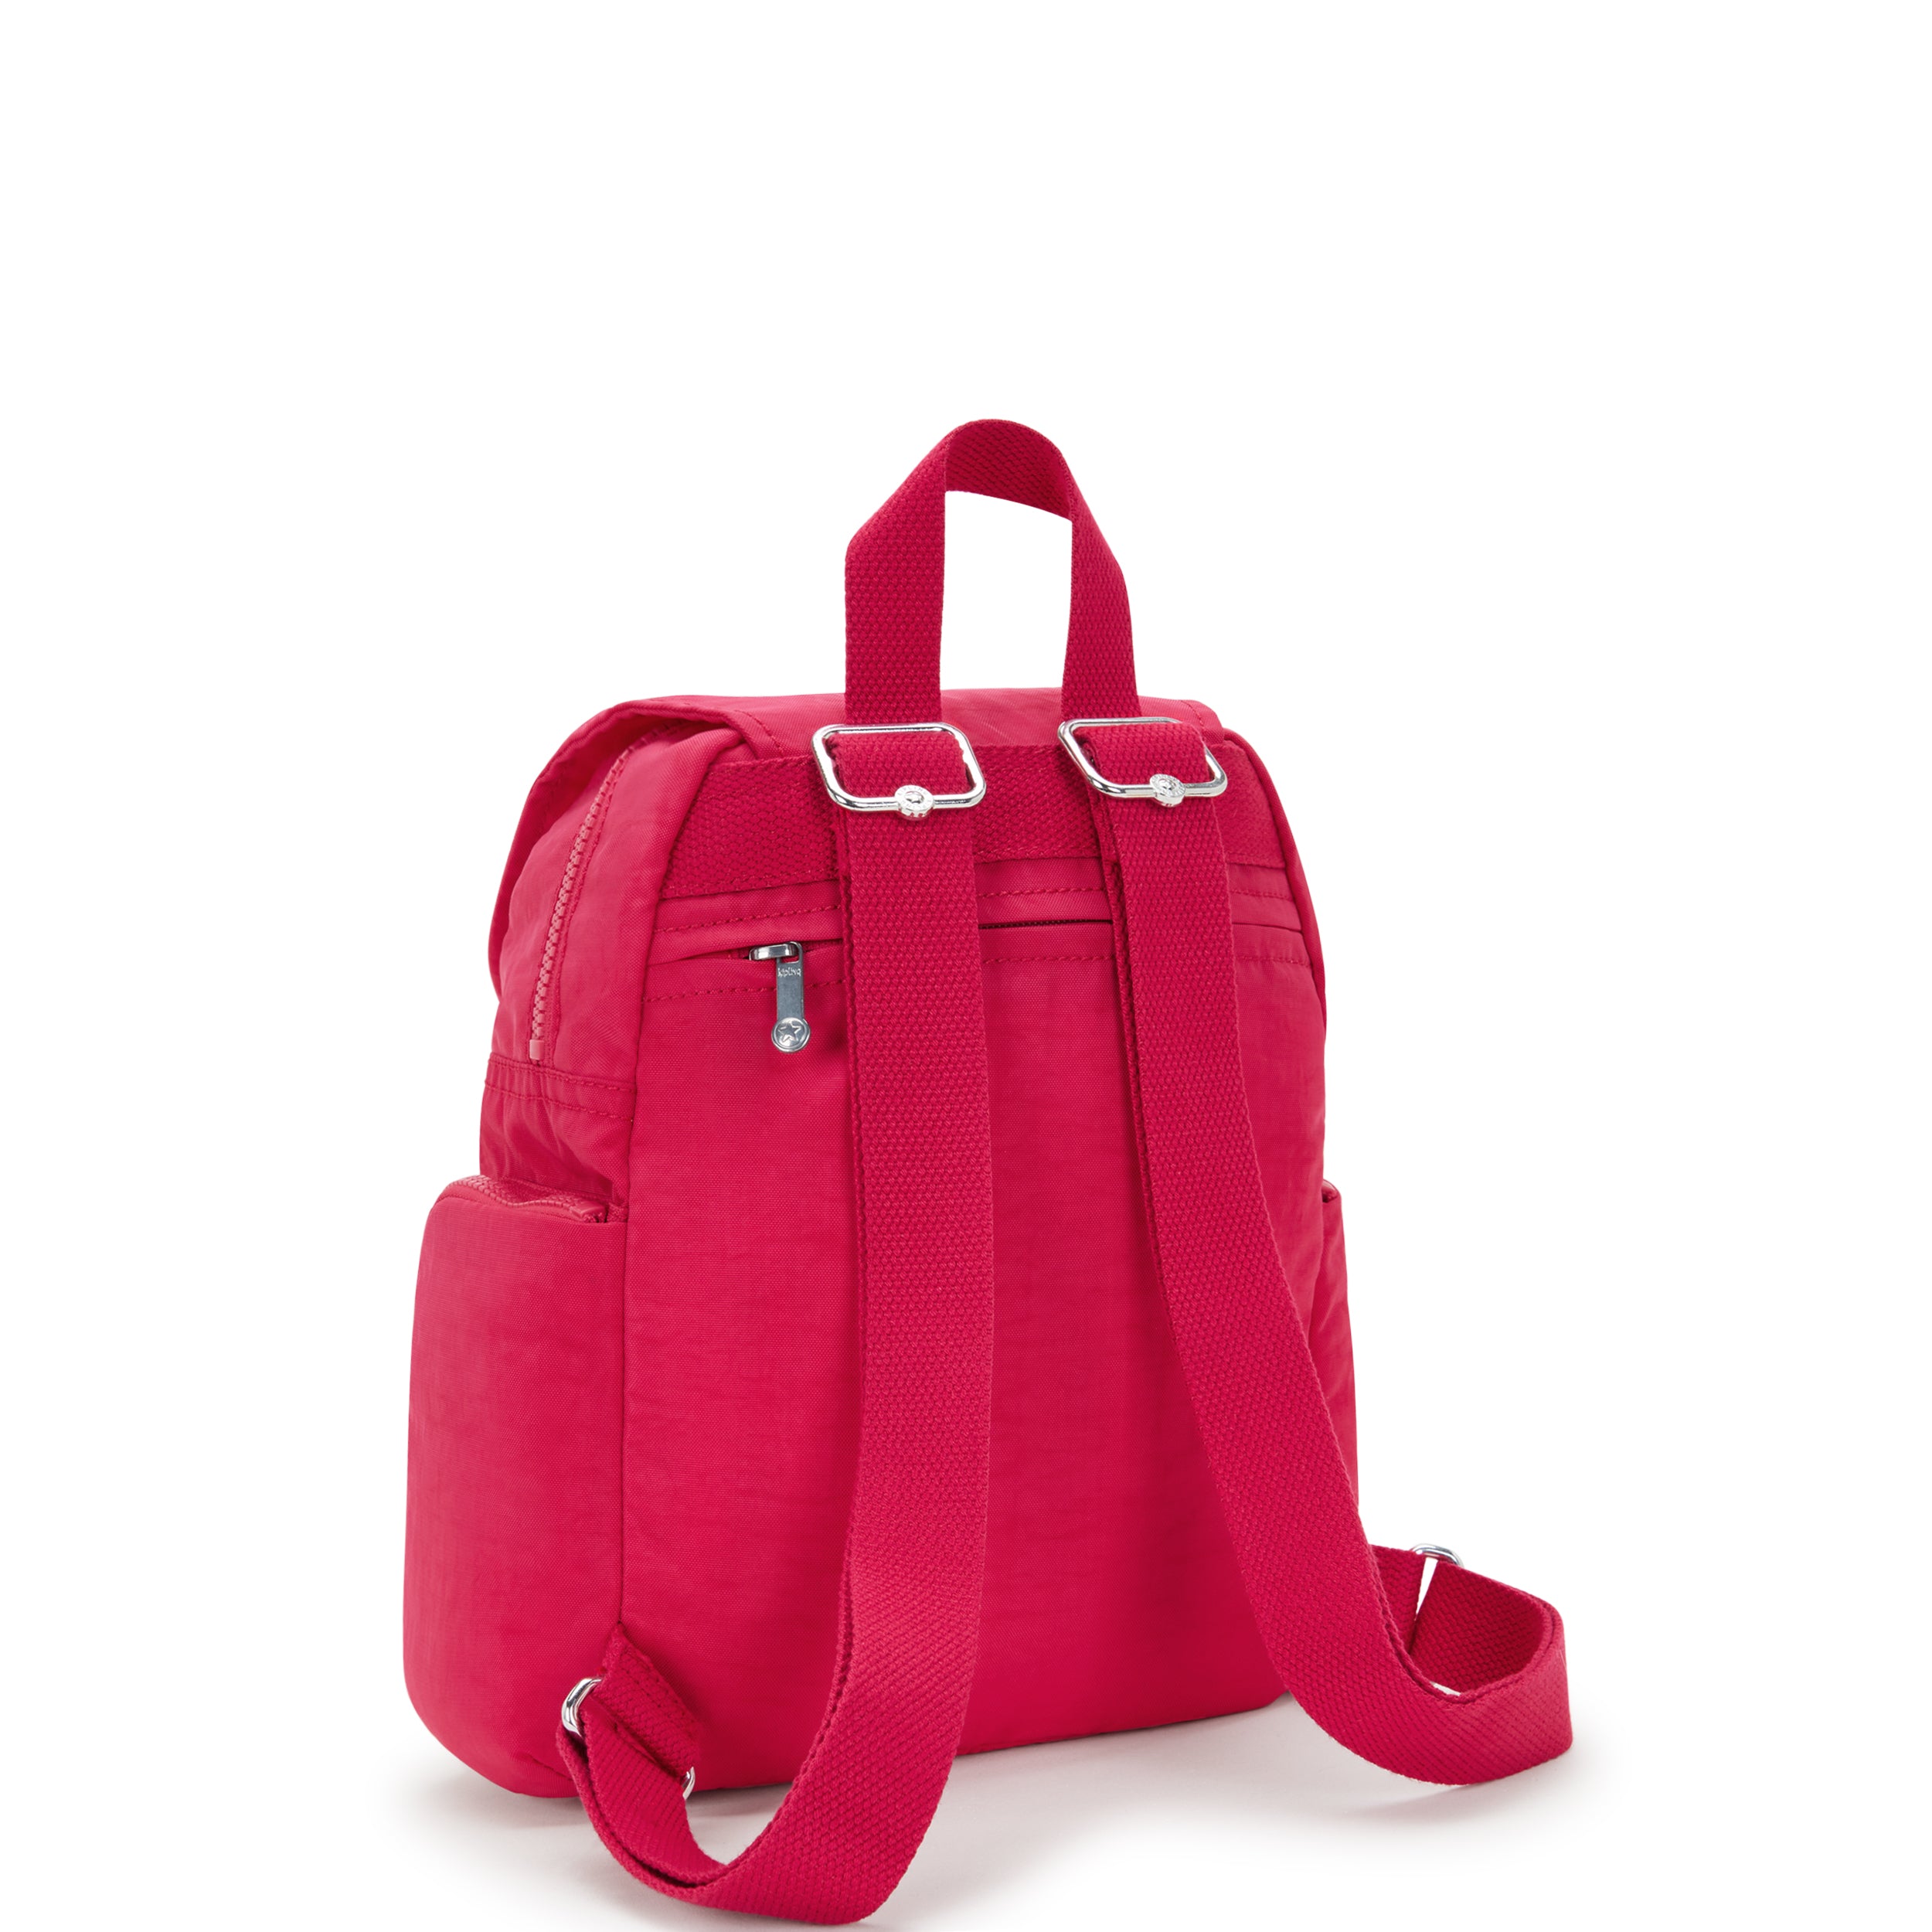 KIPLING-City Zip S-Small Backpack with Adjustable Straps-Confetti Pink-I3523-T73